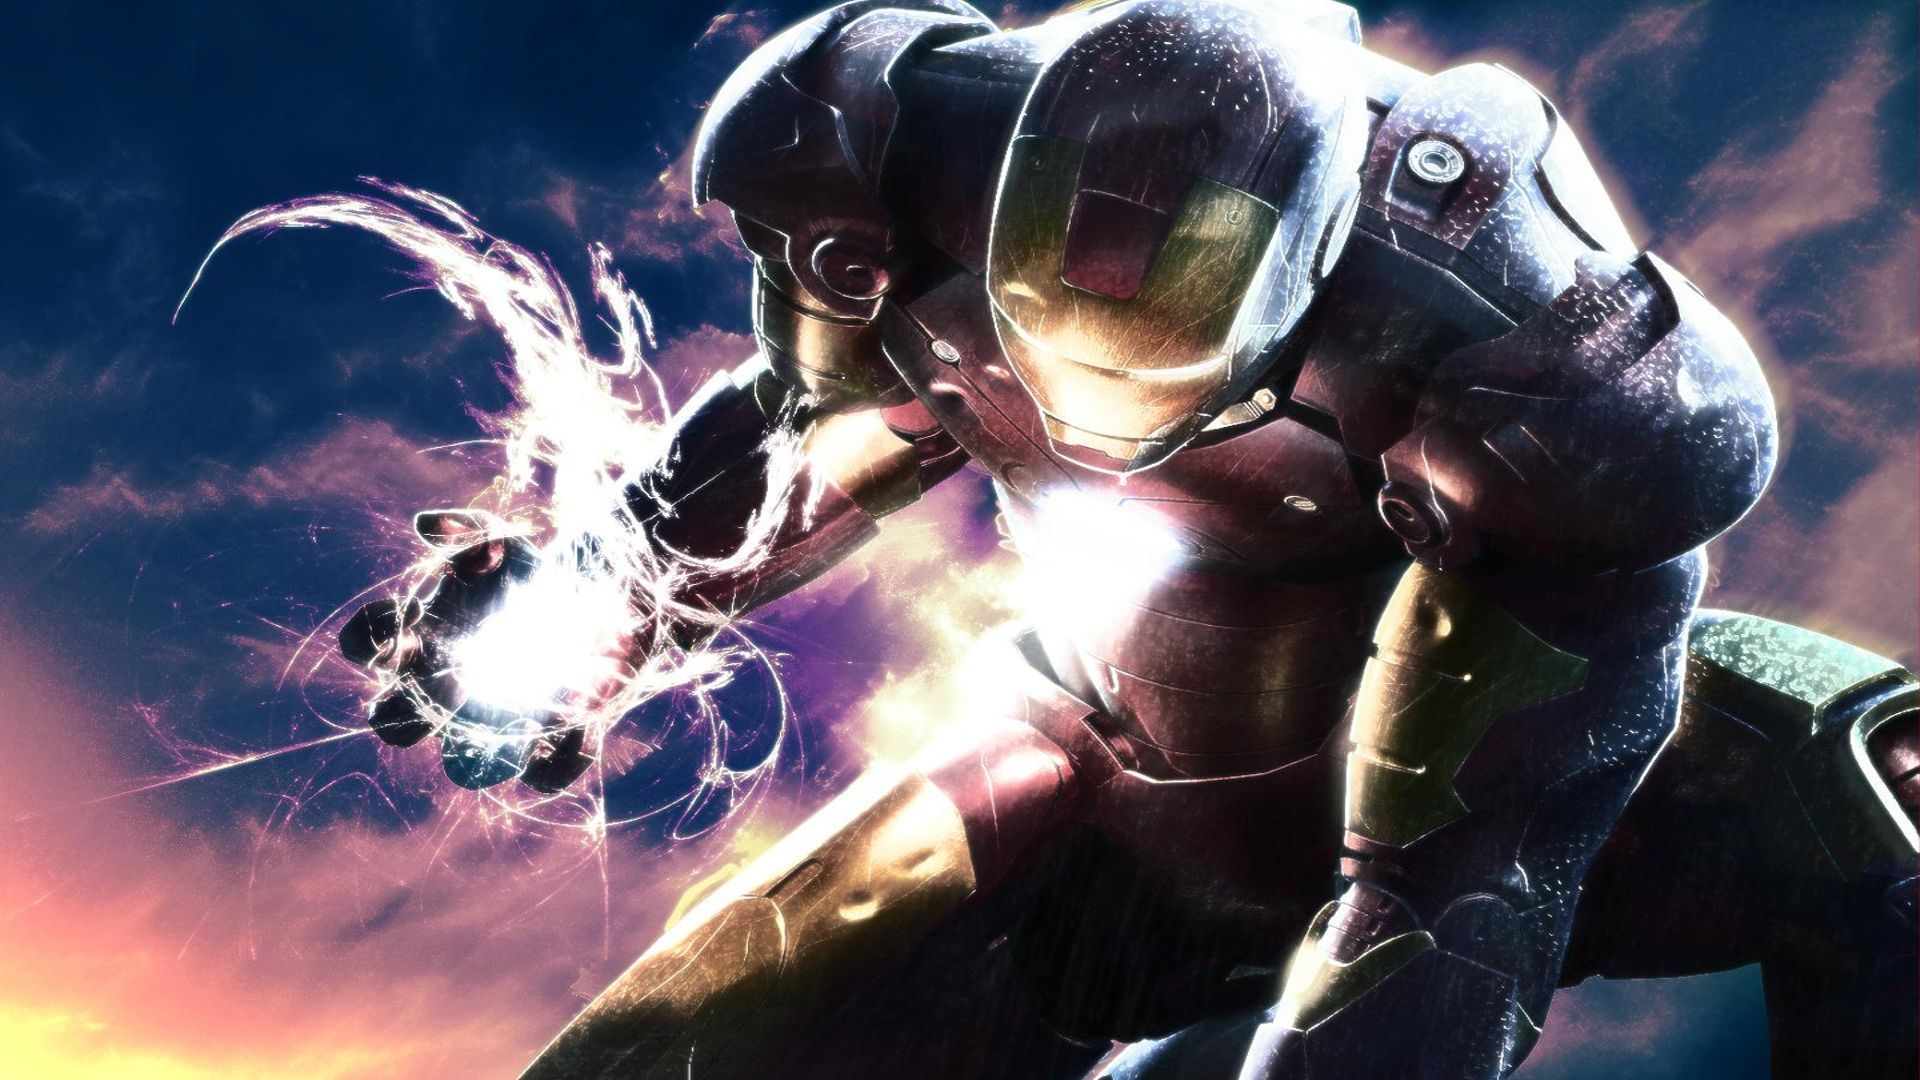 520 Iron Man HD Wallpapers Backgrounds - Wallpaper Abyss